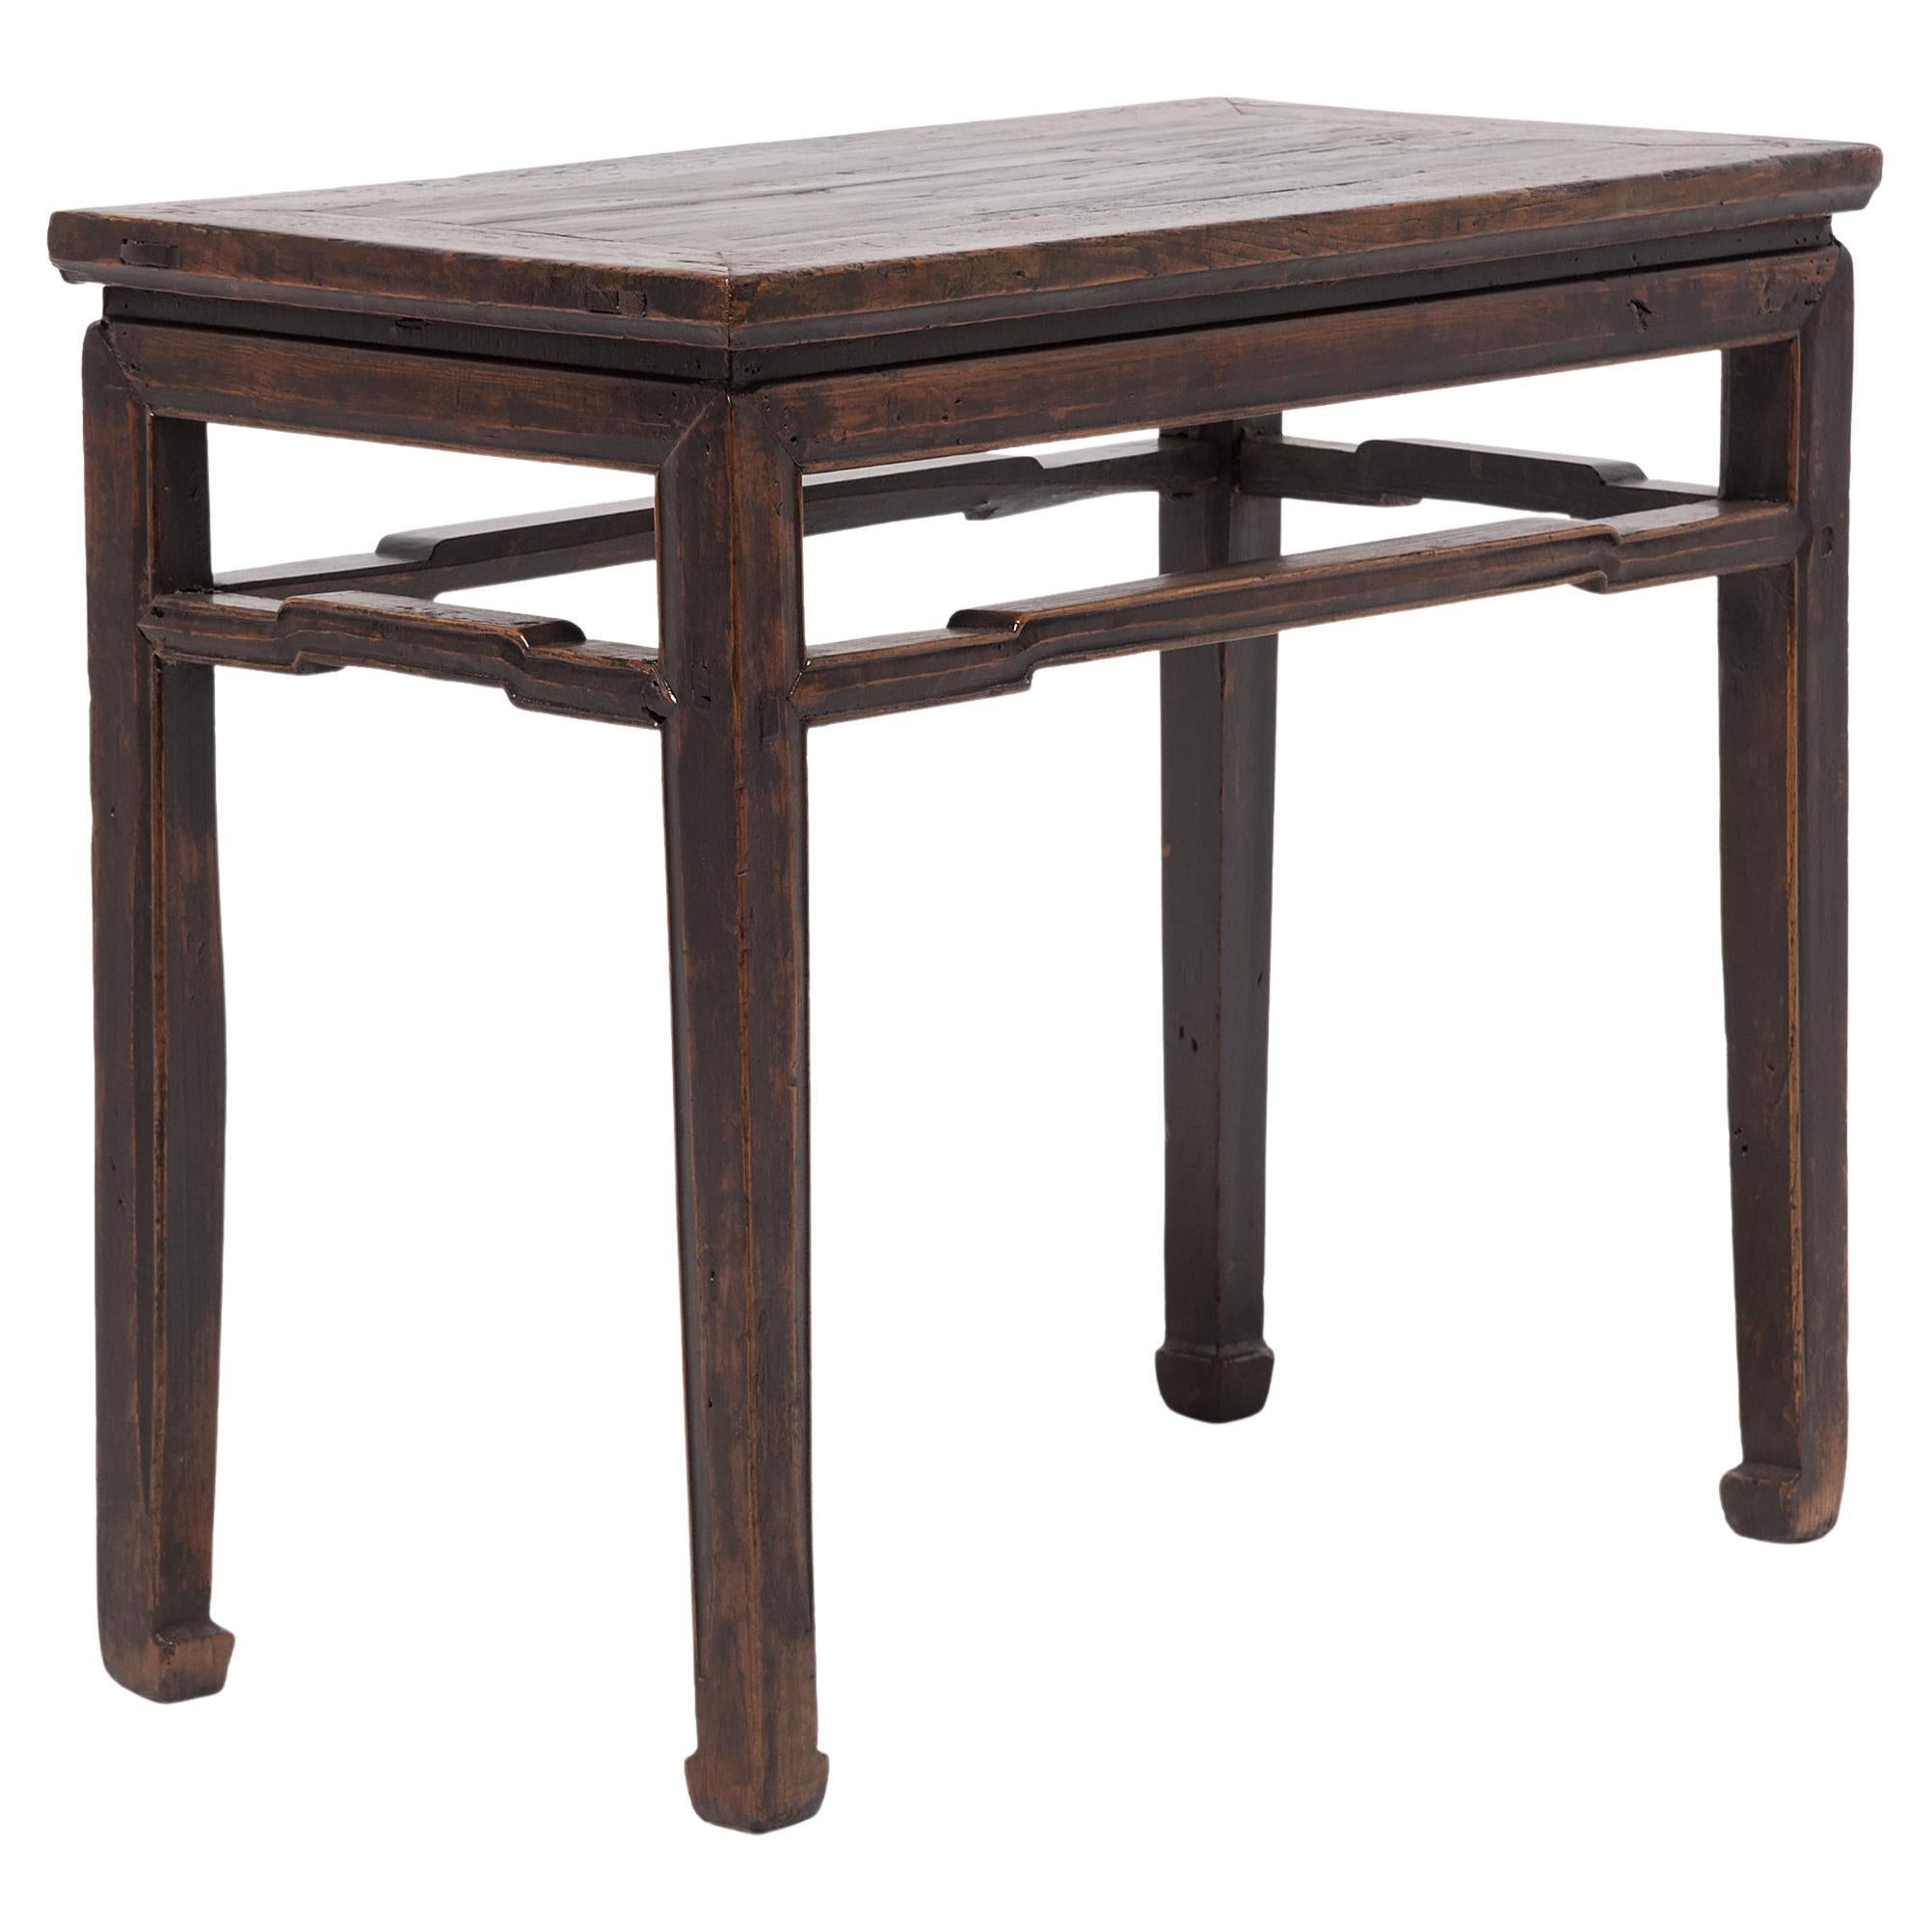 Chinese Half Table with Humpback Stretchers, c. 1900